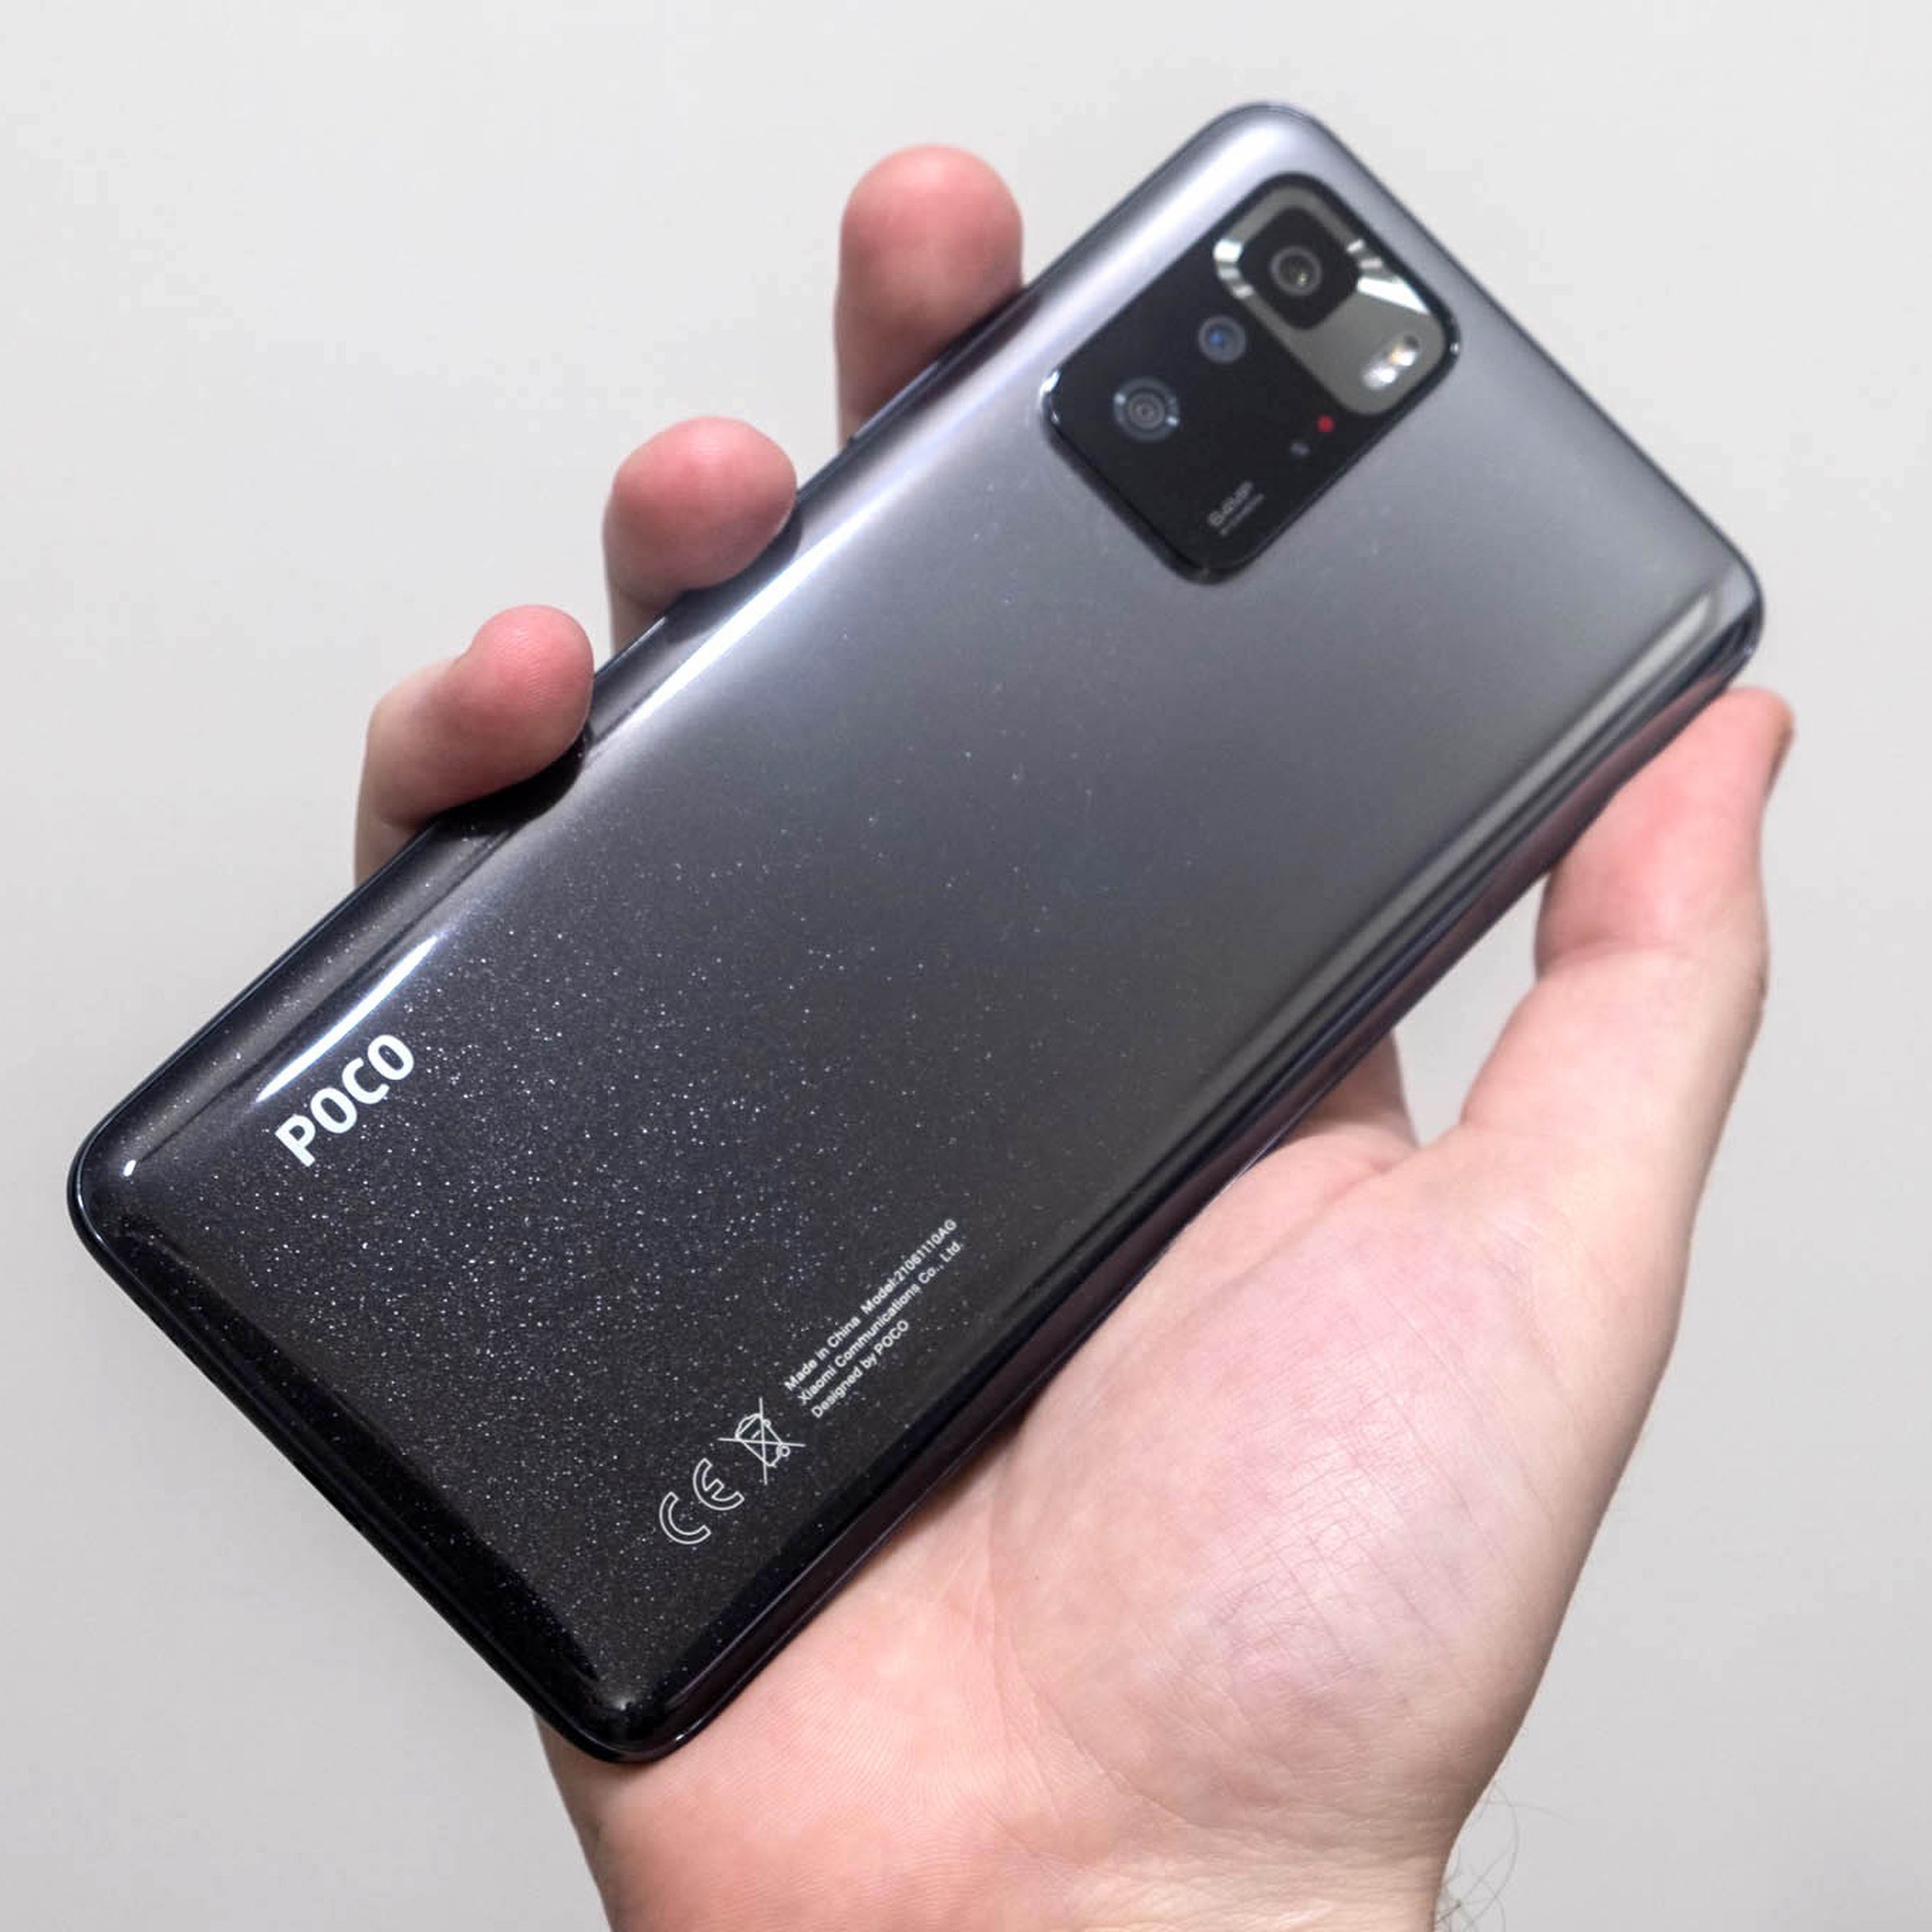 The Poco X3 GT looks very similar to the Chinese version of Xiaomi’s Redmi Note 10 Pro.